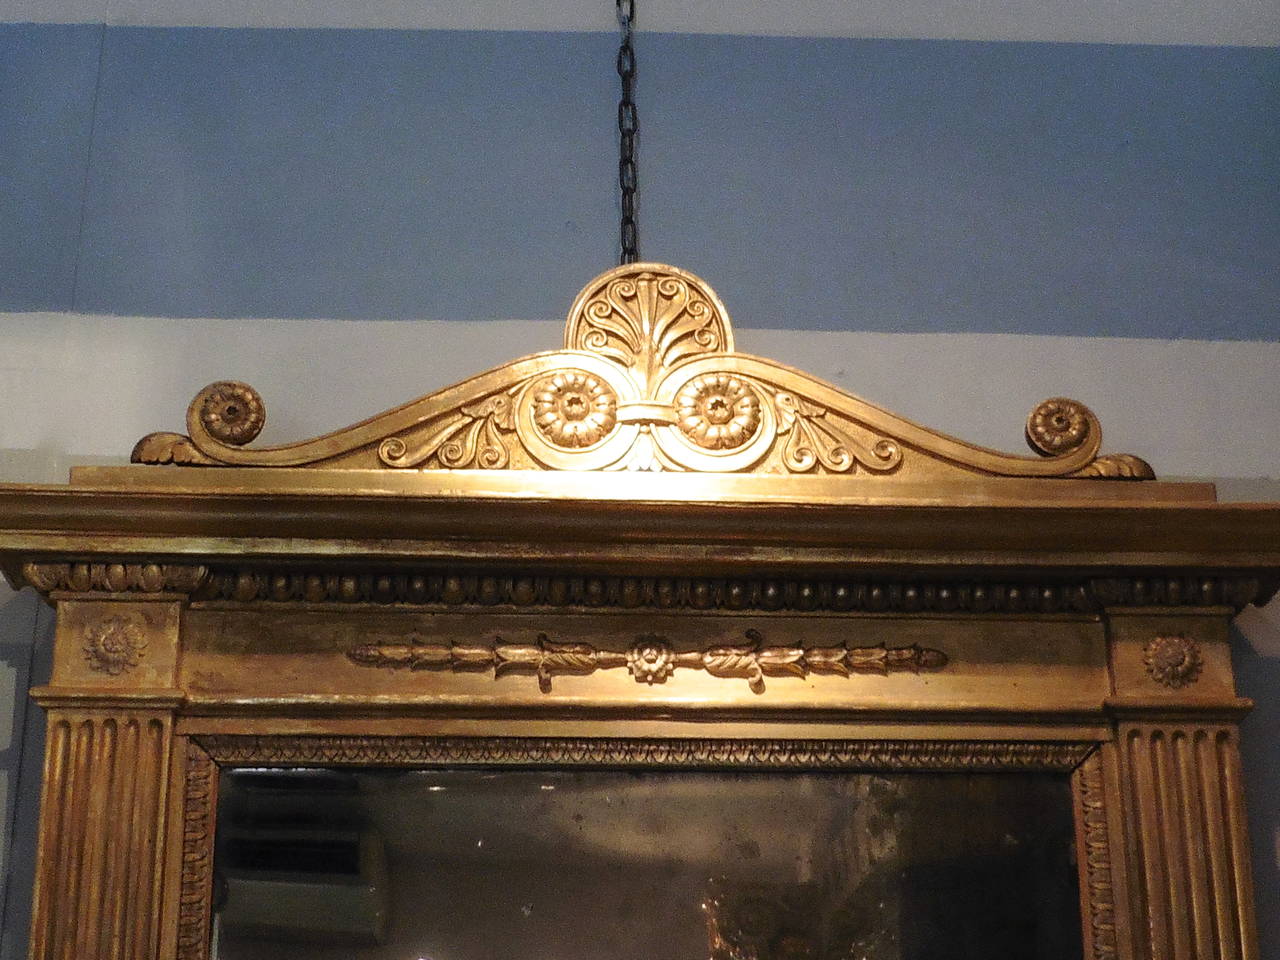 An elegant Italian neoclassical giltwood mirror with an Anthemion pedimented crest above the orginal bevelled mirror plate, flanked by fluted pilasters, terminating in paw feet, circa 1820.